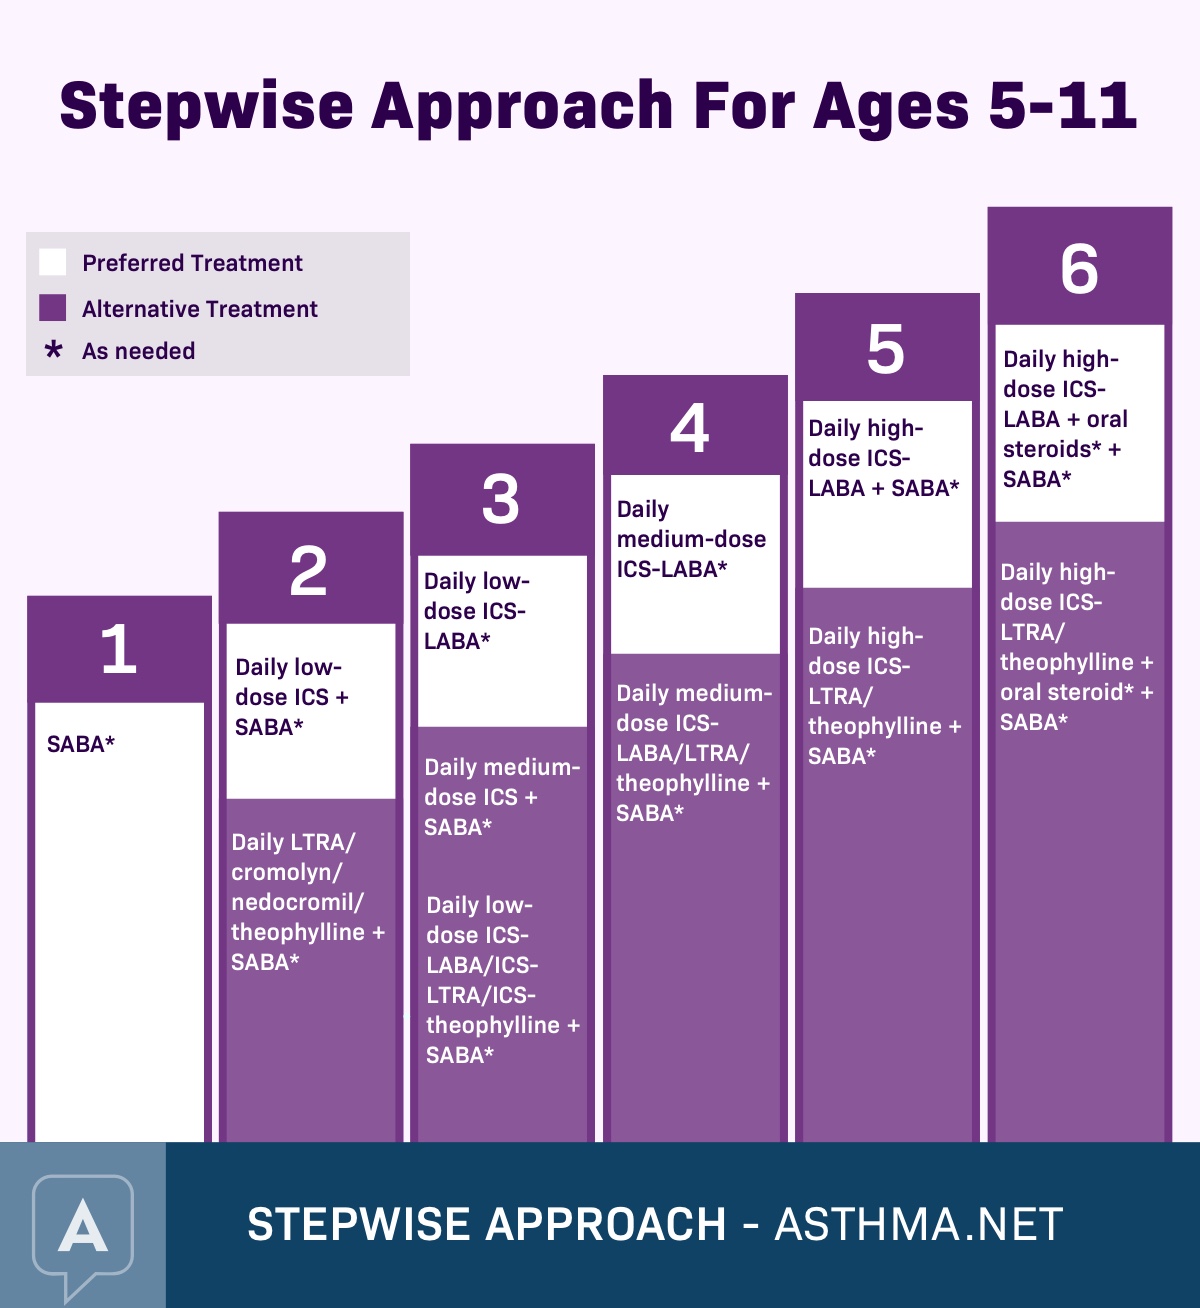 Stepwise Approach For Ages 5-11